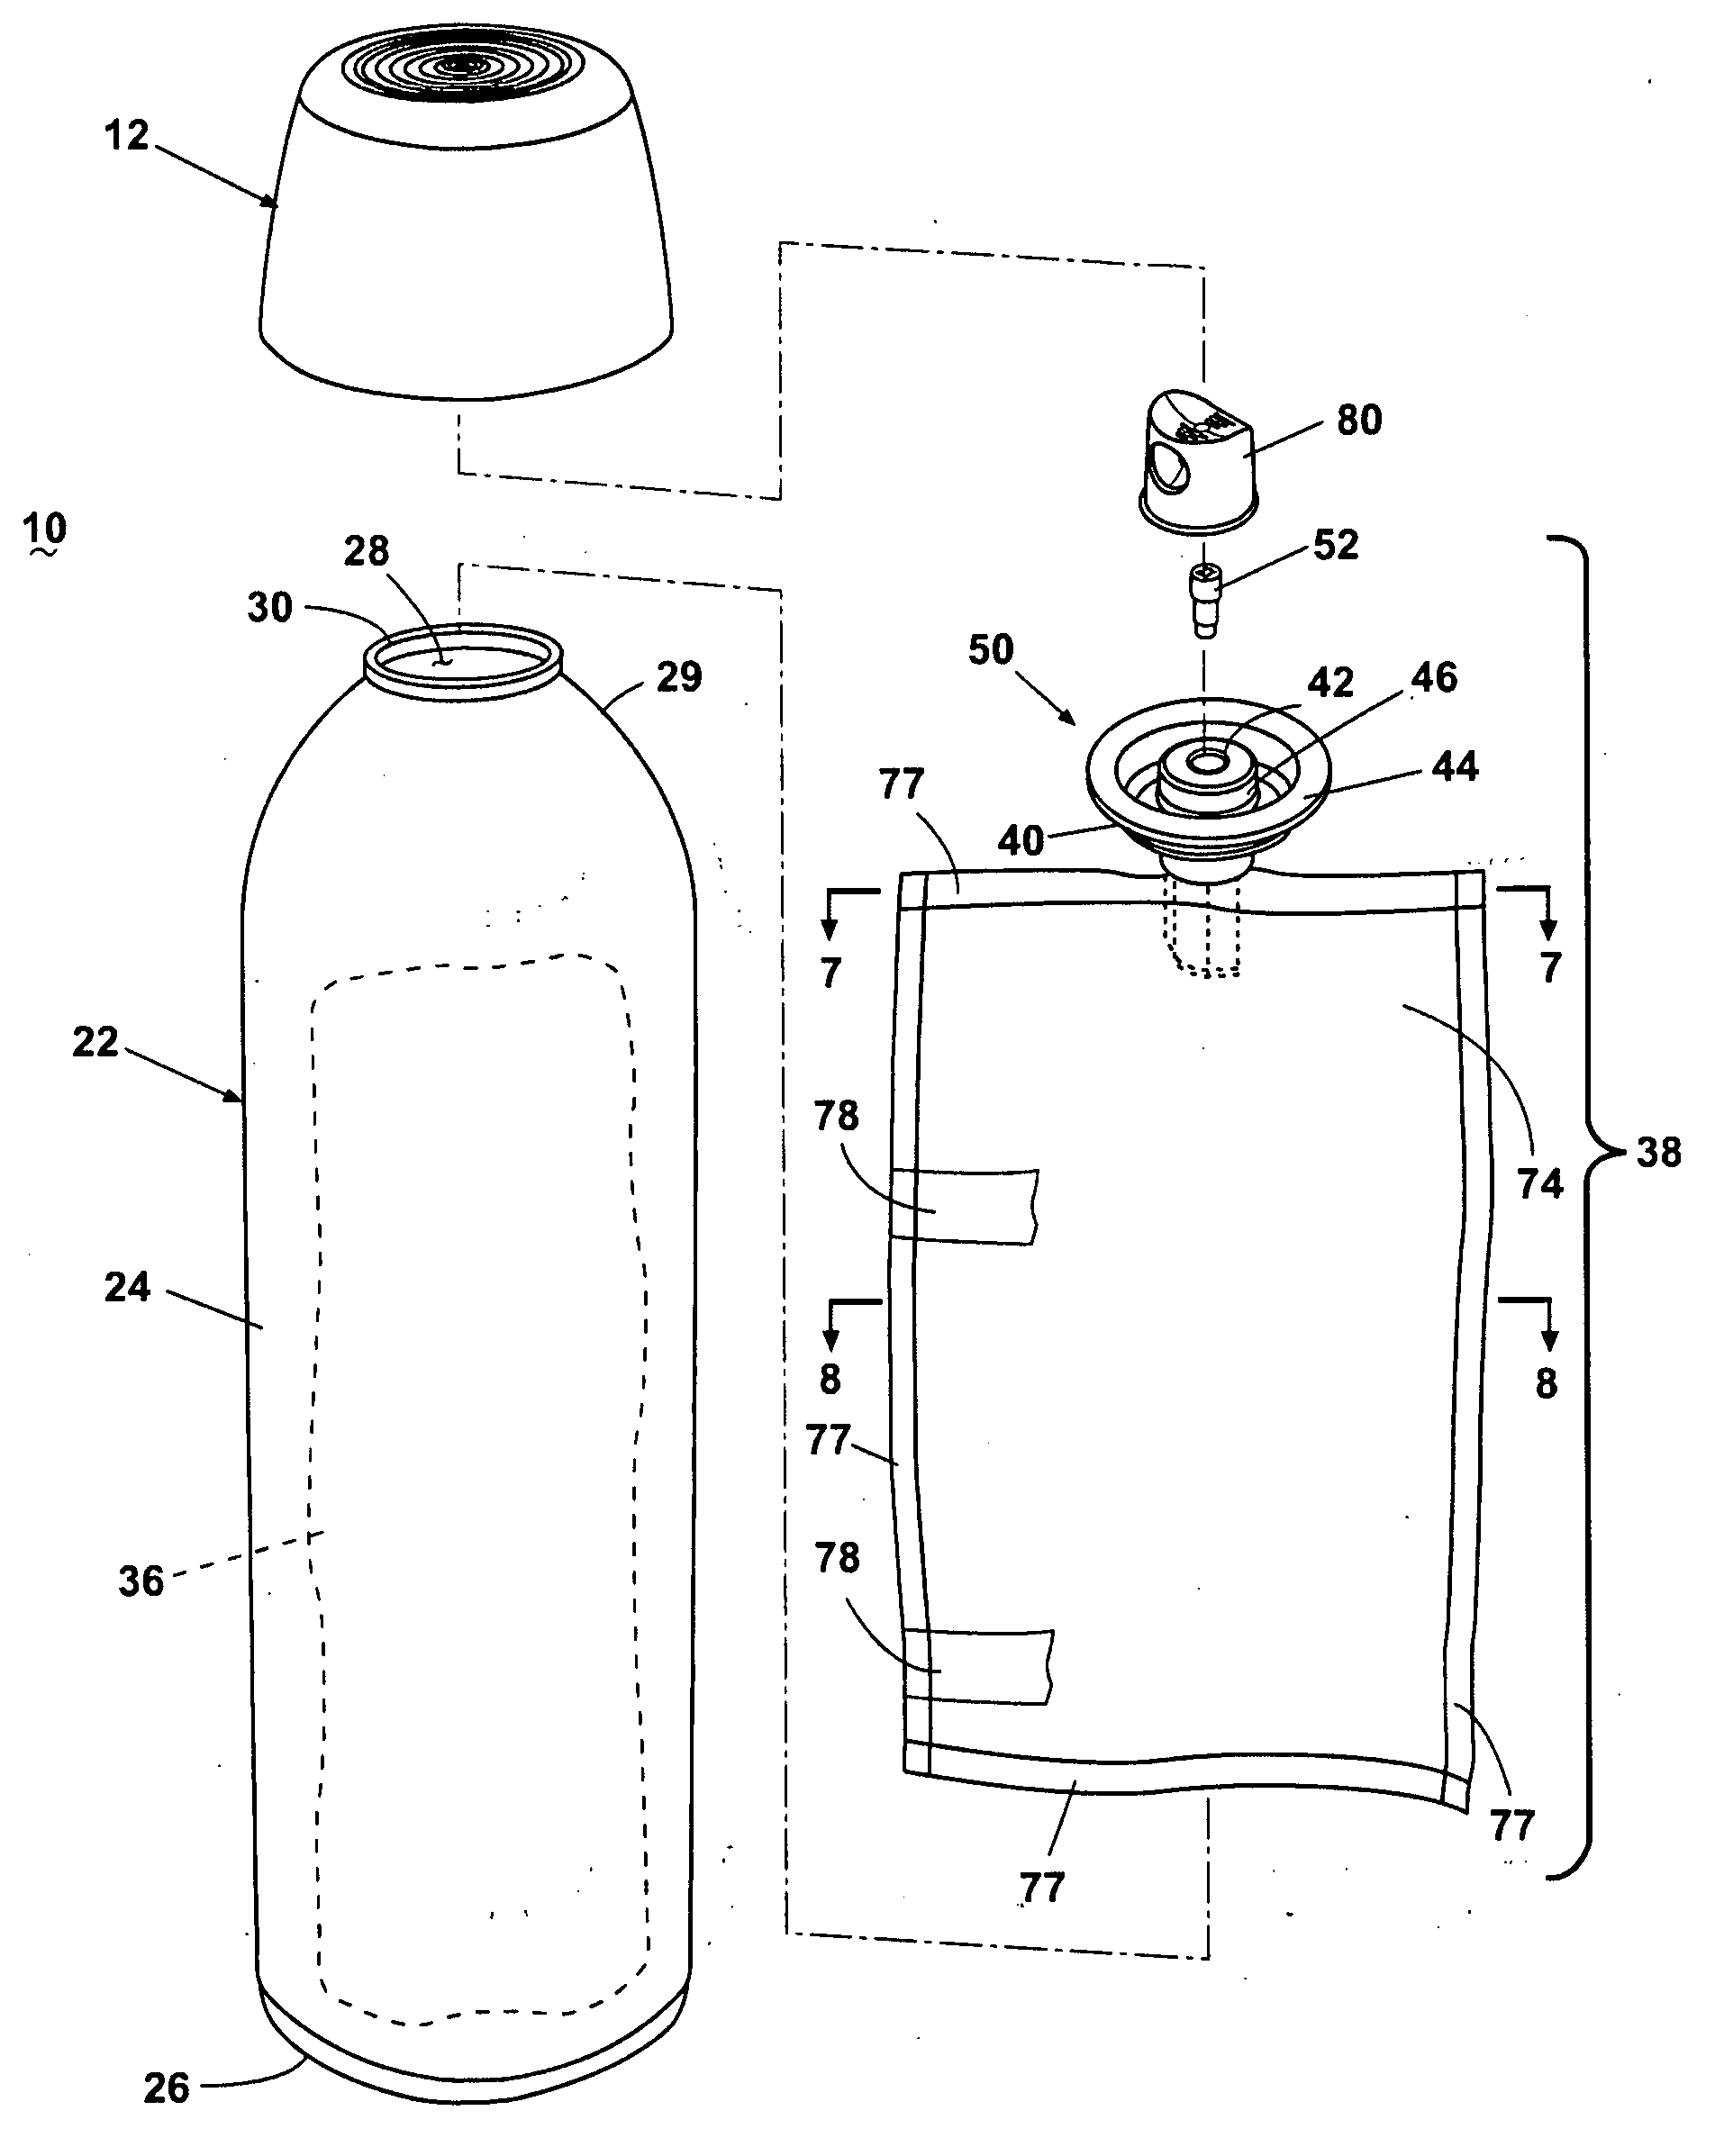 Manual Spray Cleaner